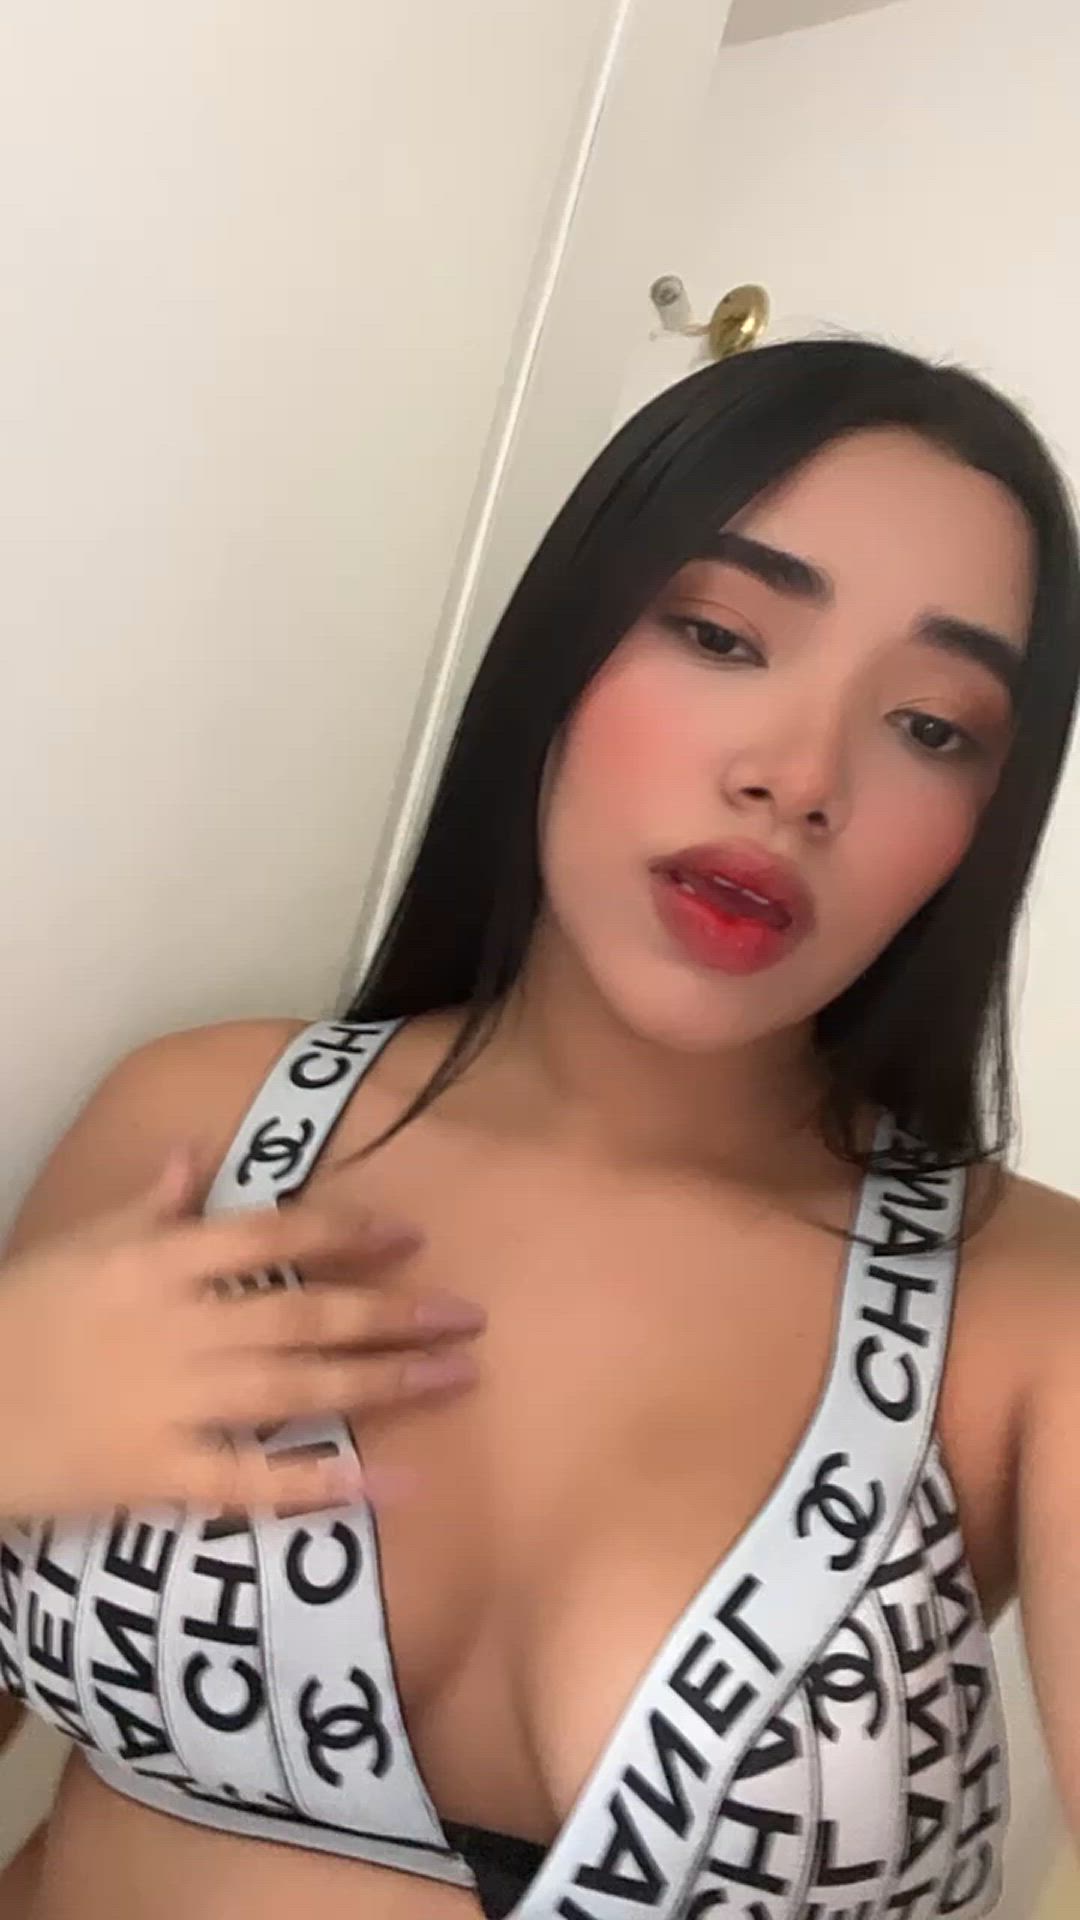 Boobs porn video with onlyfans model isabellasun <strong>@isabella.sun</strong>